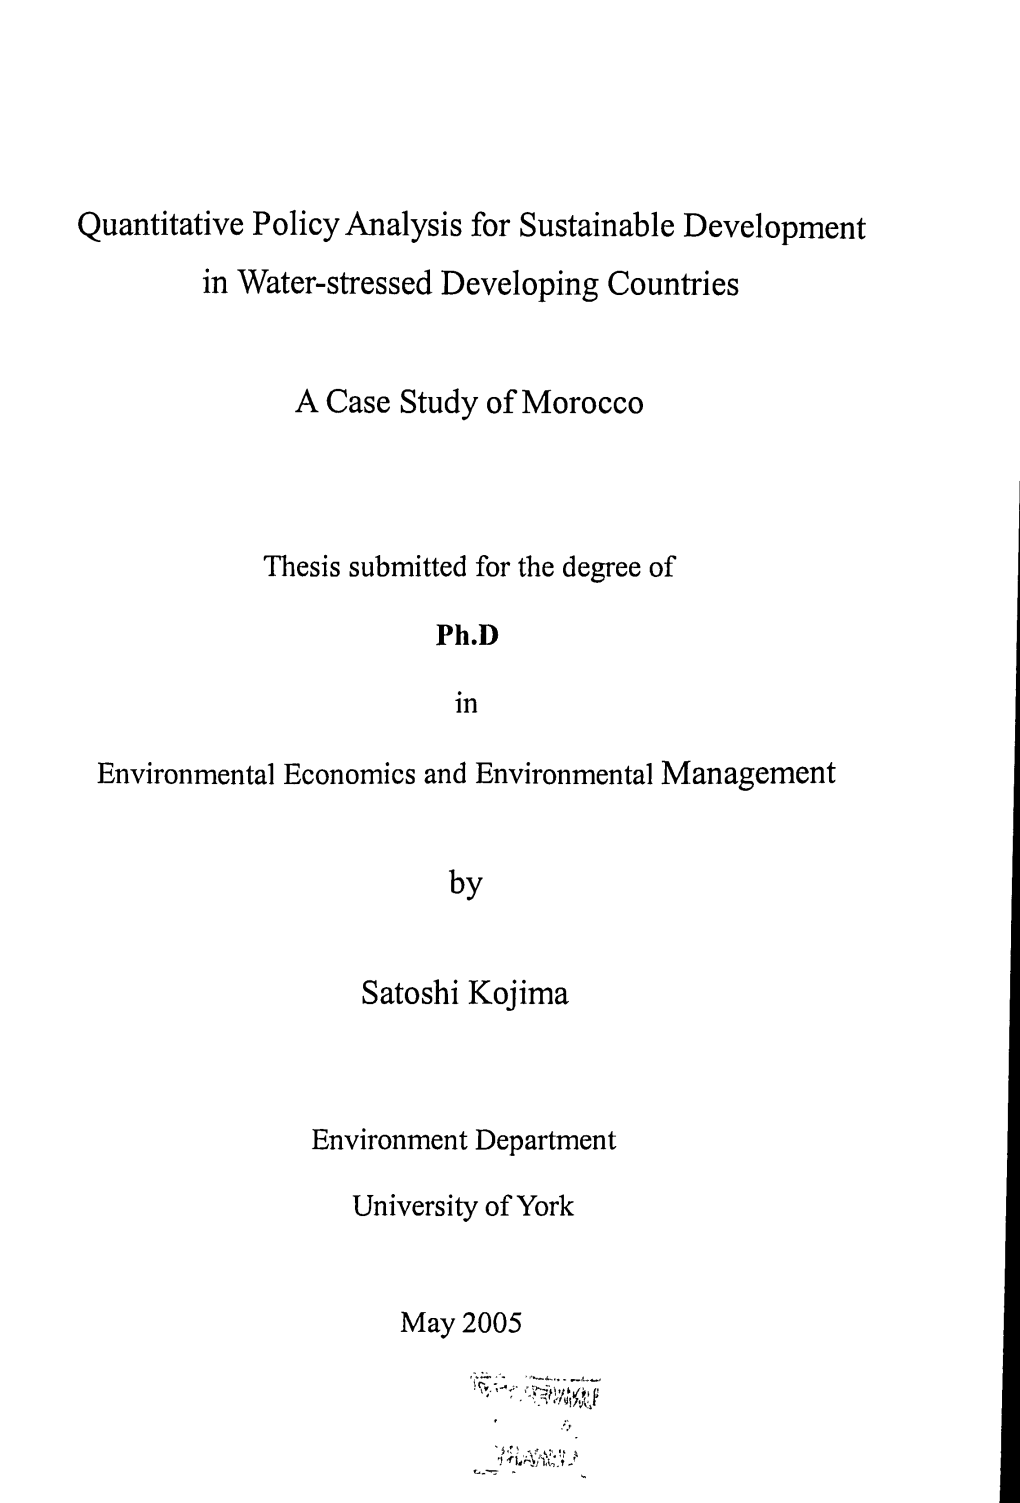 Thesis Submitted for the Degree of Ph. D in Environmental Economics And